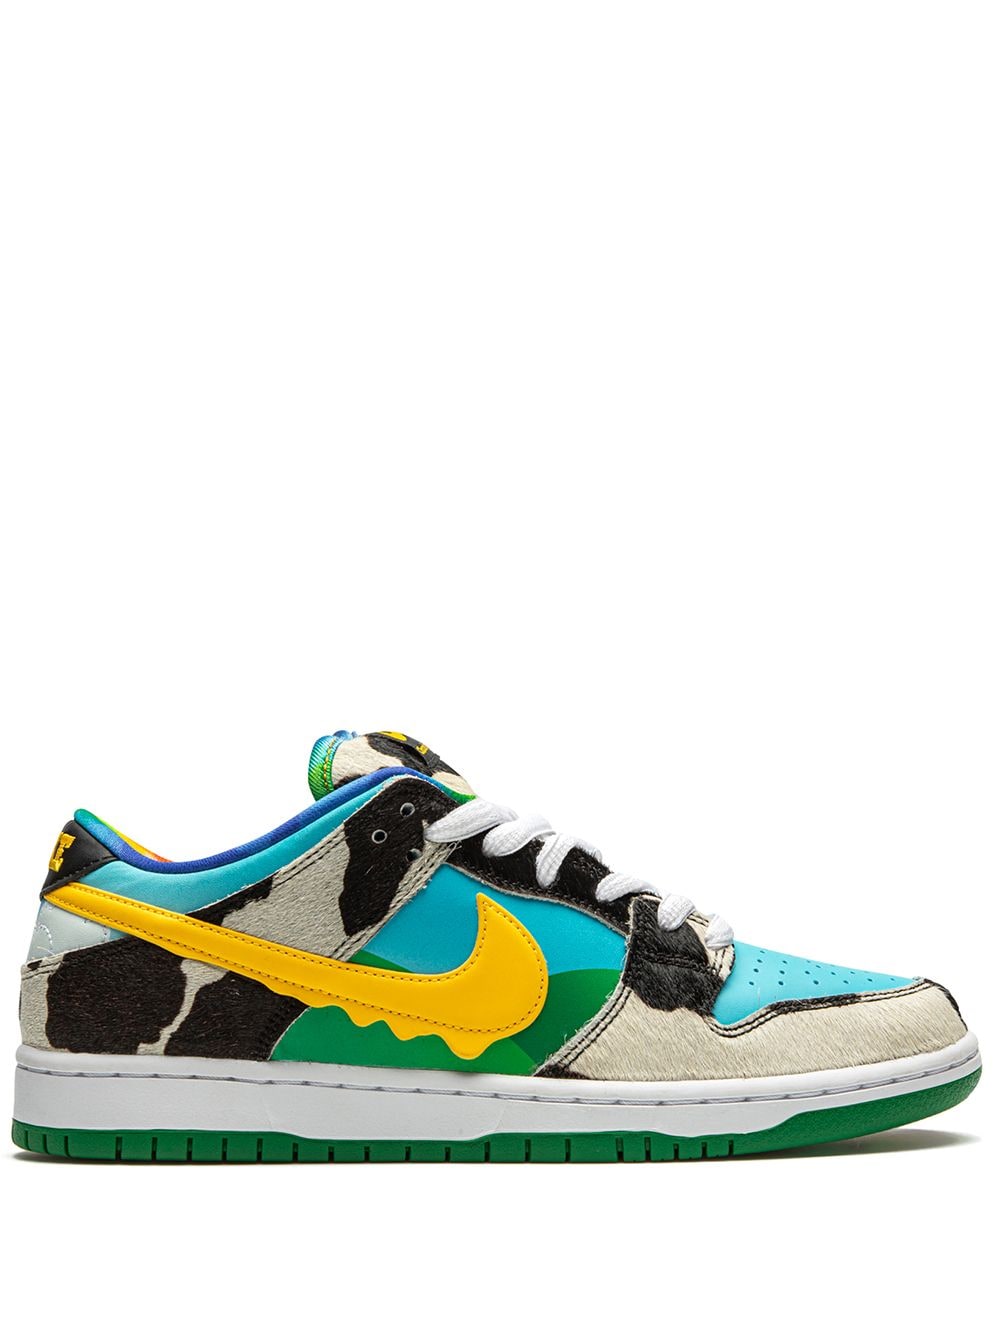 Nike x Ben & Jerry's SB Dunk Low "Chunky Dunky" sneakers - Blue von Nike